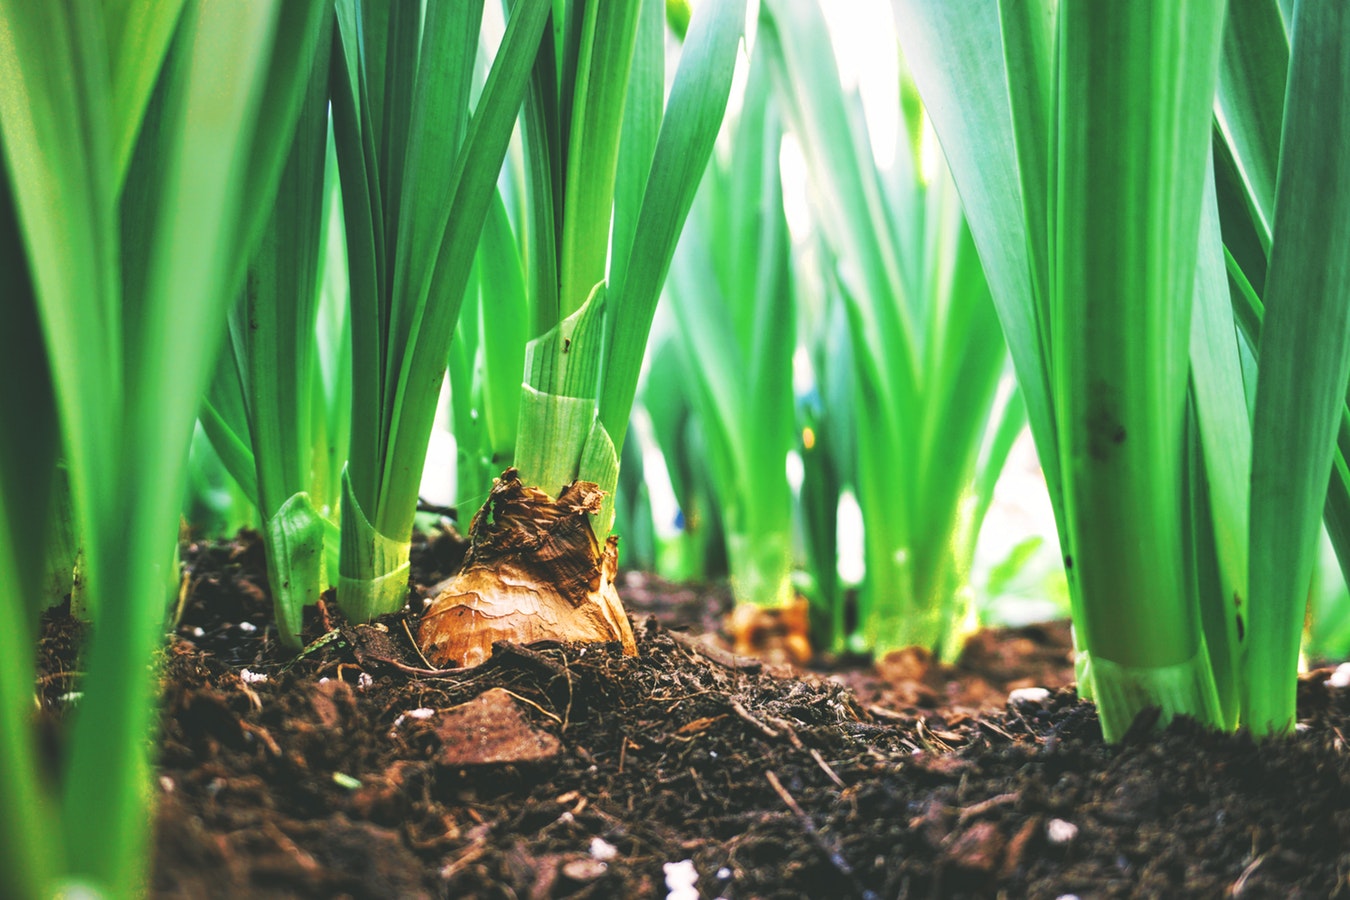 7 Eco-living and sustainability tips to honor earth day, every day